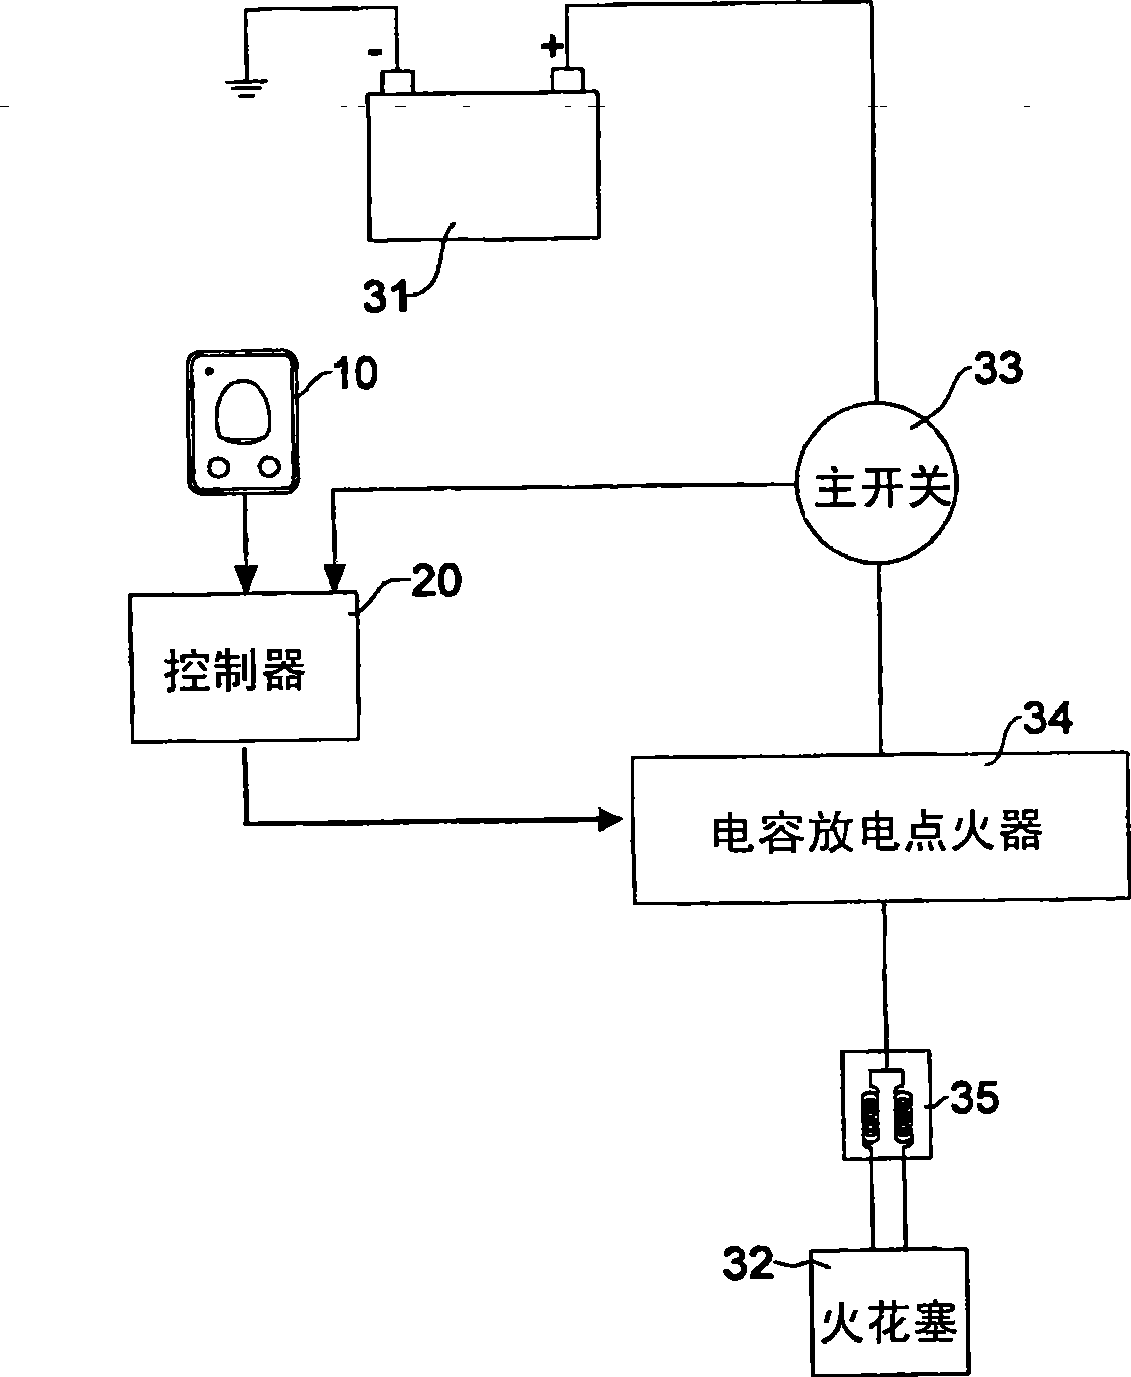 Fingerprint identification anti-theft device and method for motorcycle